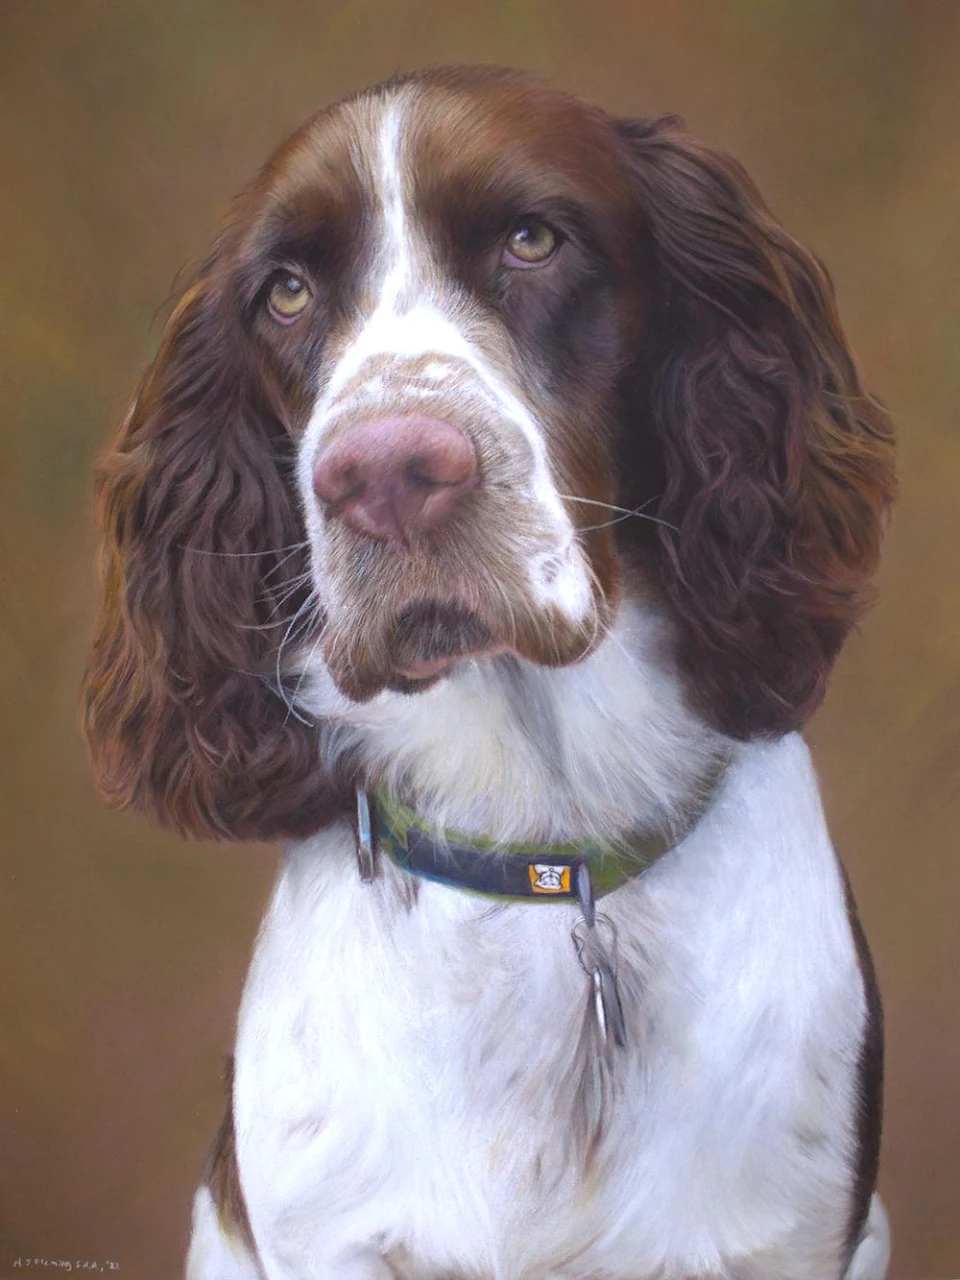 Hi folks, here's a pastel drawing of an adorable springer. Hope you like it!